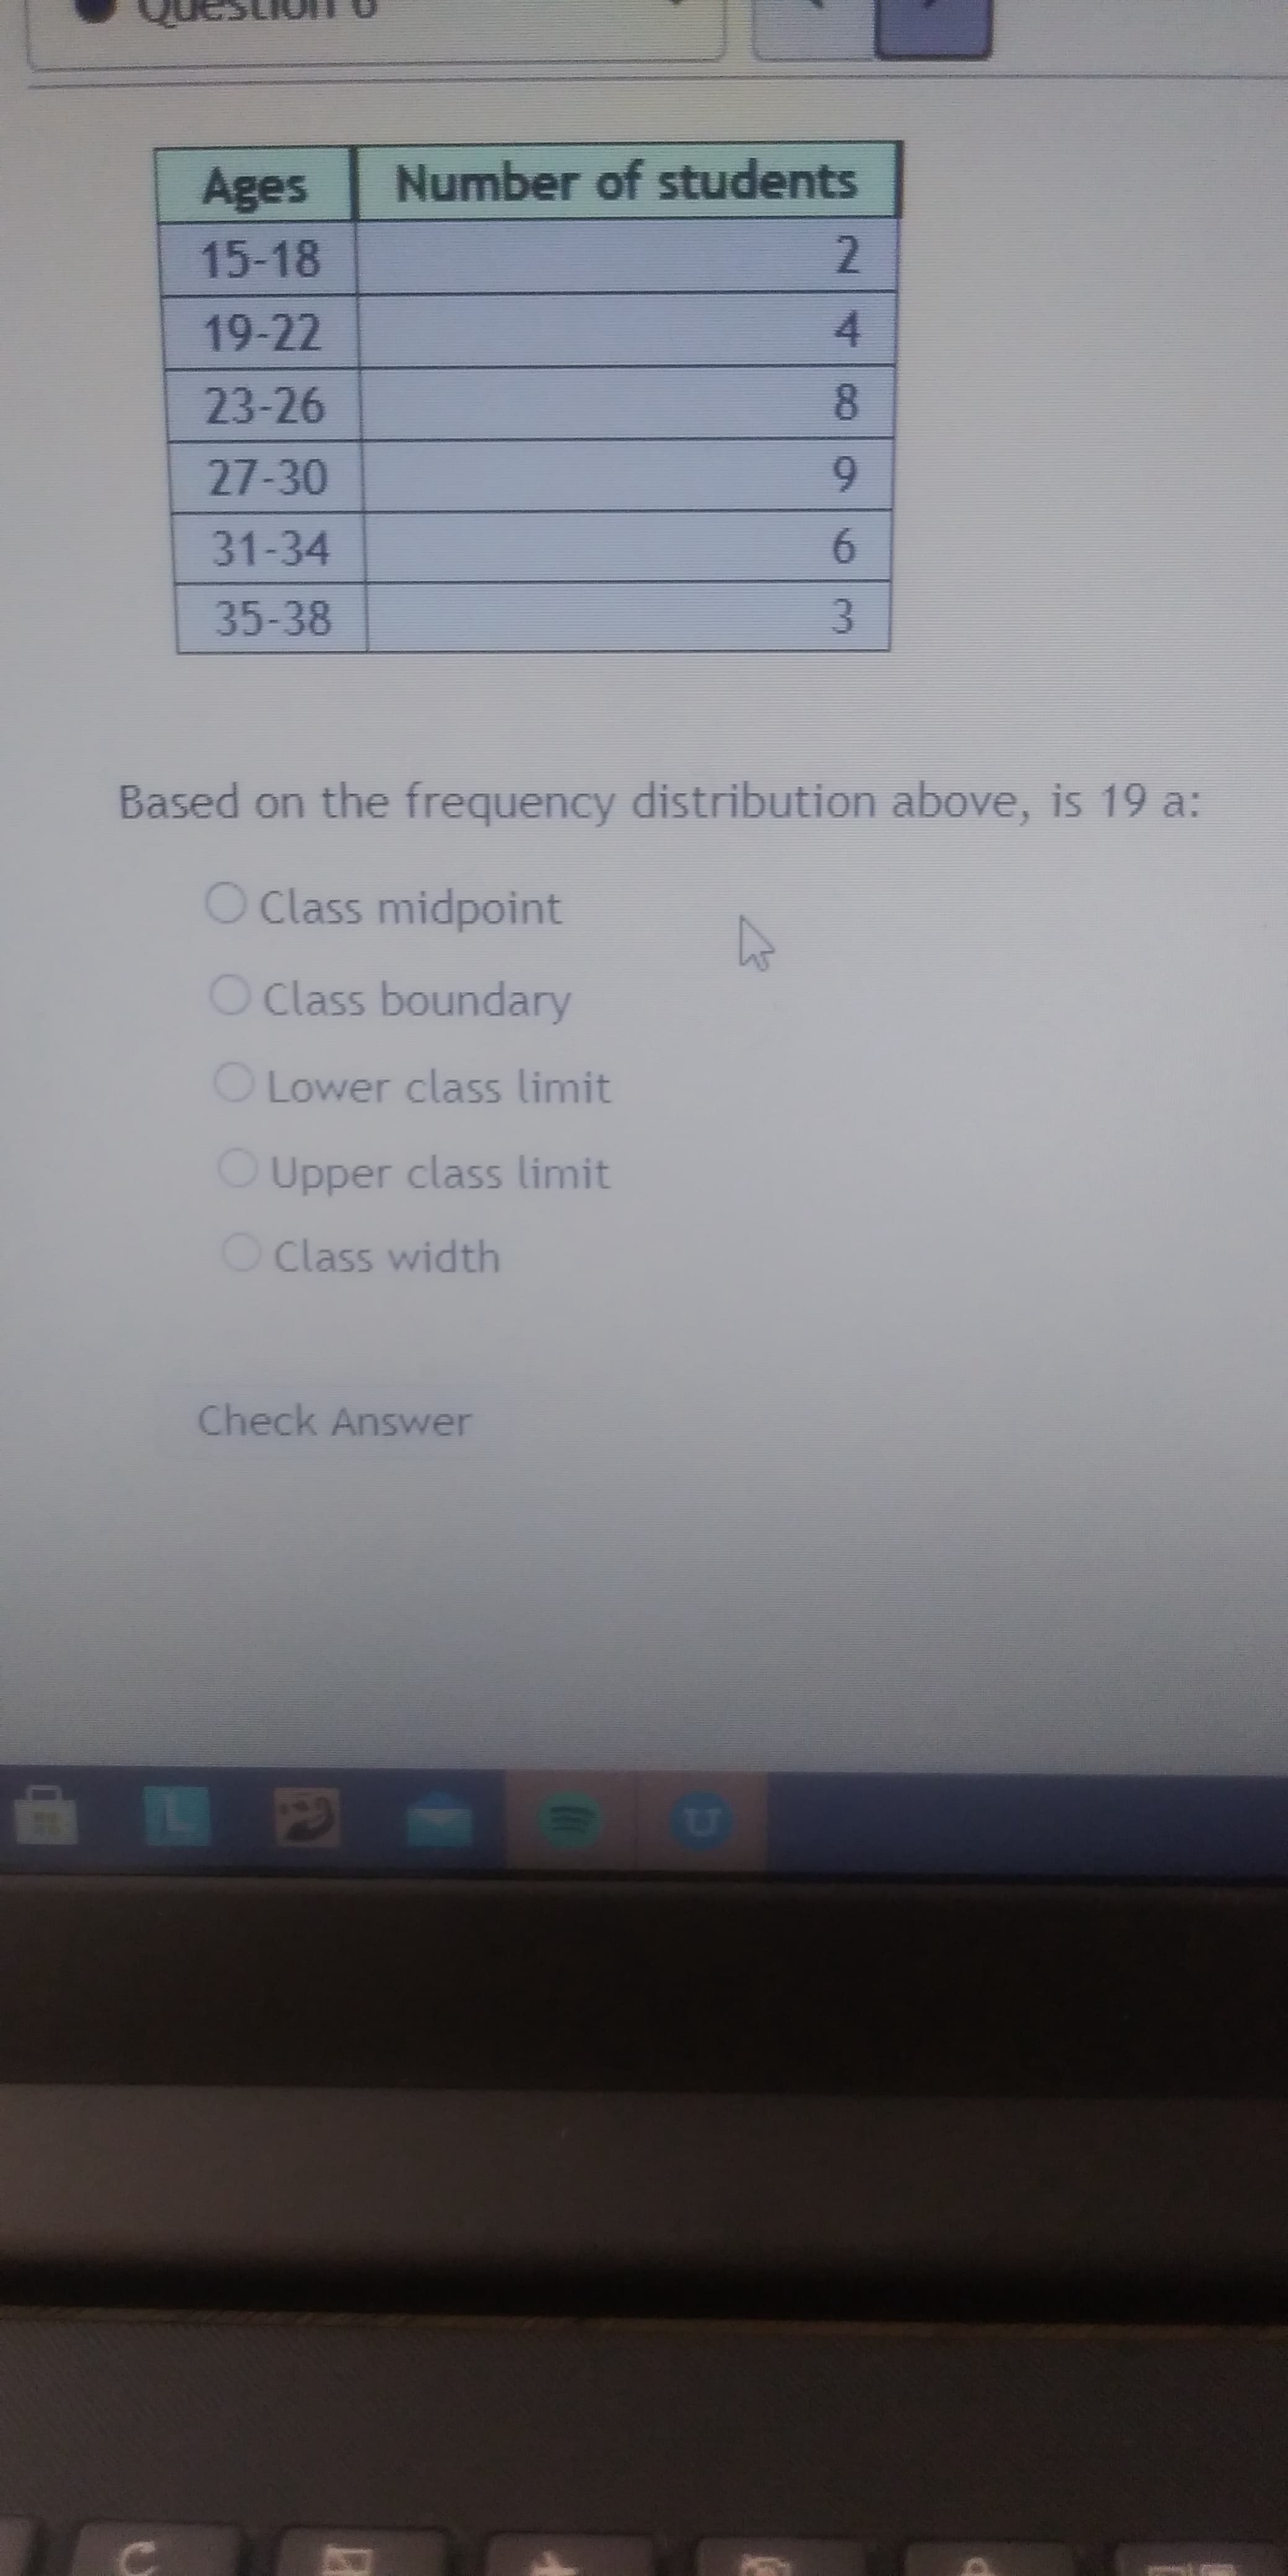 Based on the frequency distribution above, is 19 a:
O Class midpoint
O Class boundary
O Lower class limit
O Upper class limit
O Class width
